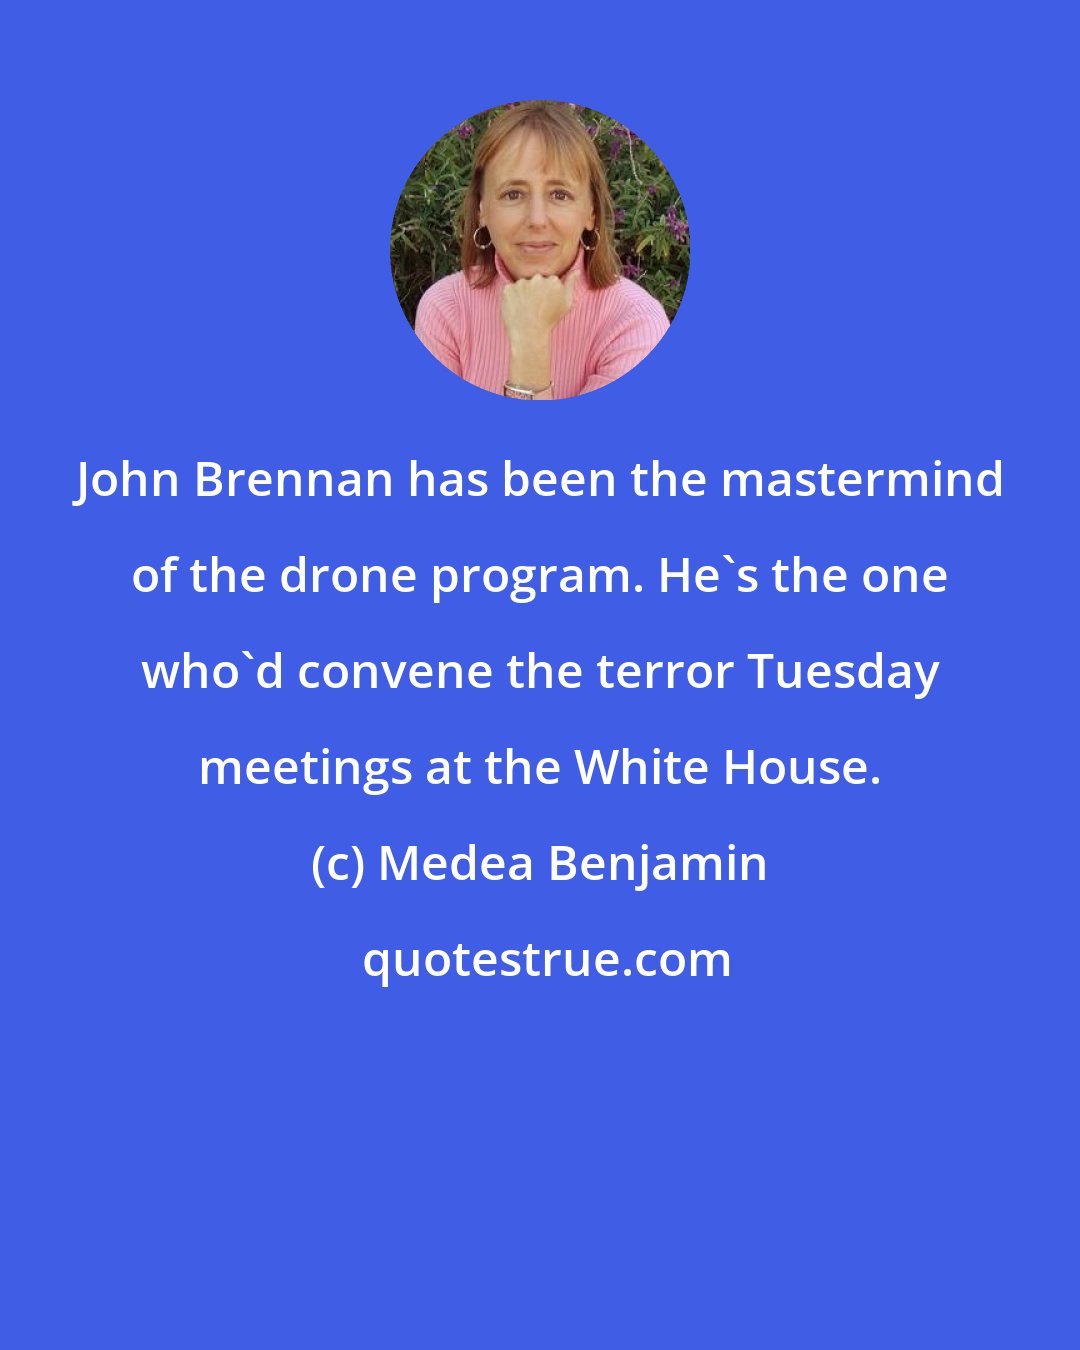 Medea Benjamin: John Brennan has been the mastermind of the drone program. He's the one who'd convene the terror Tuesday meetings at the White House.